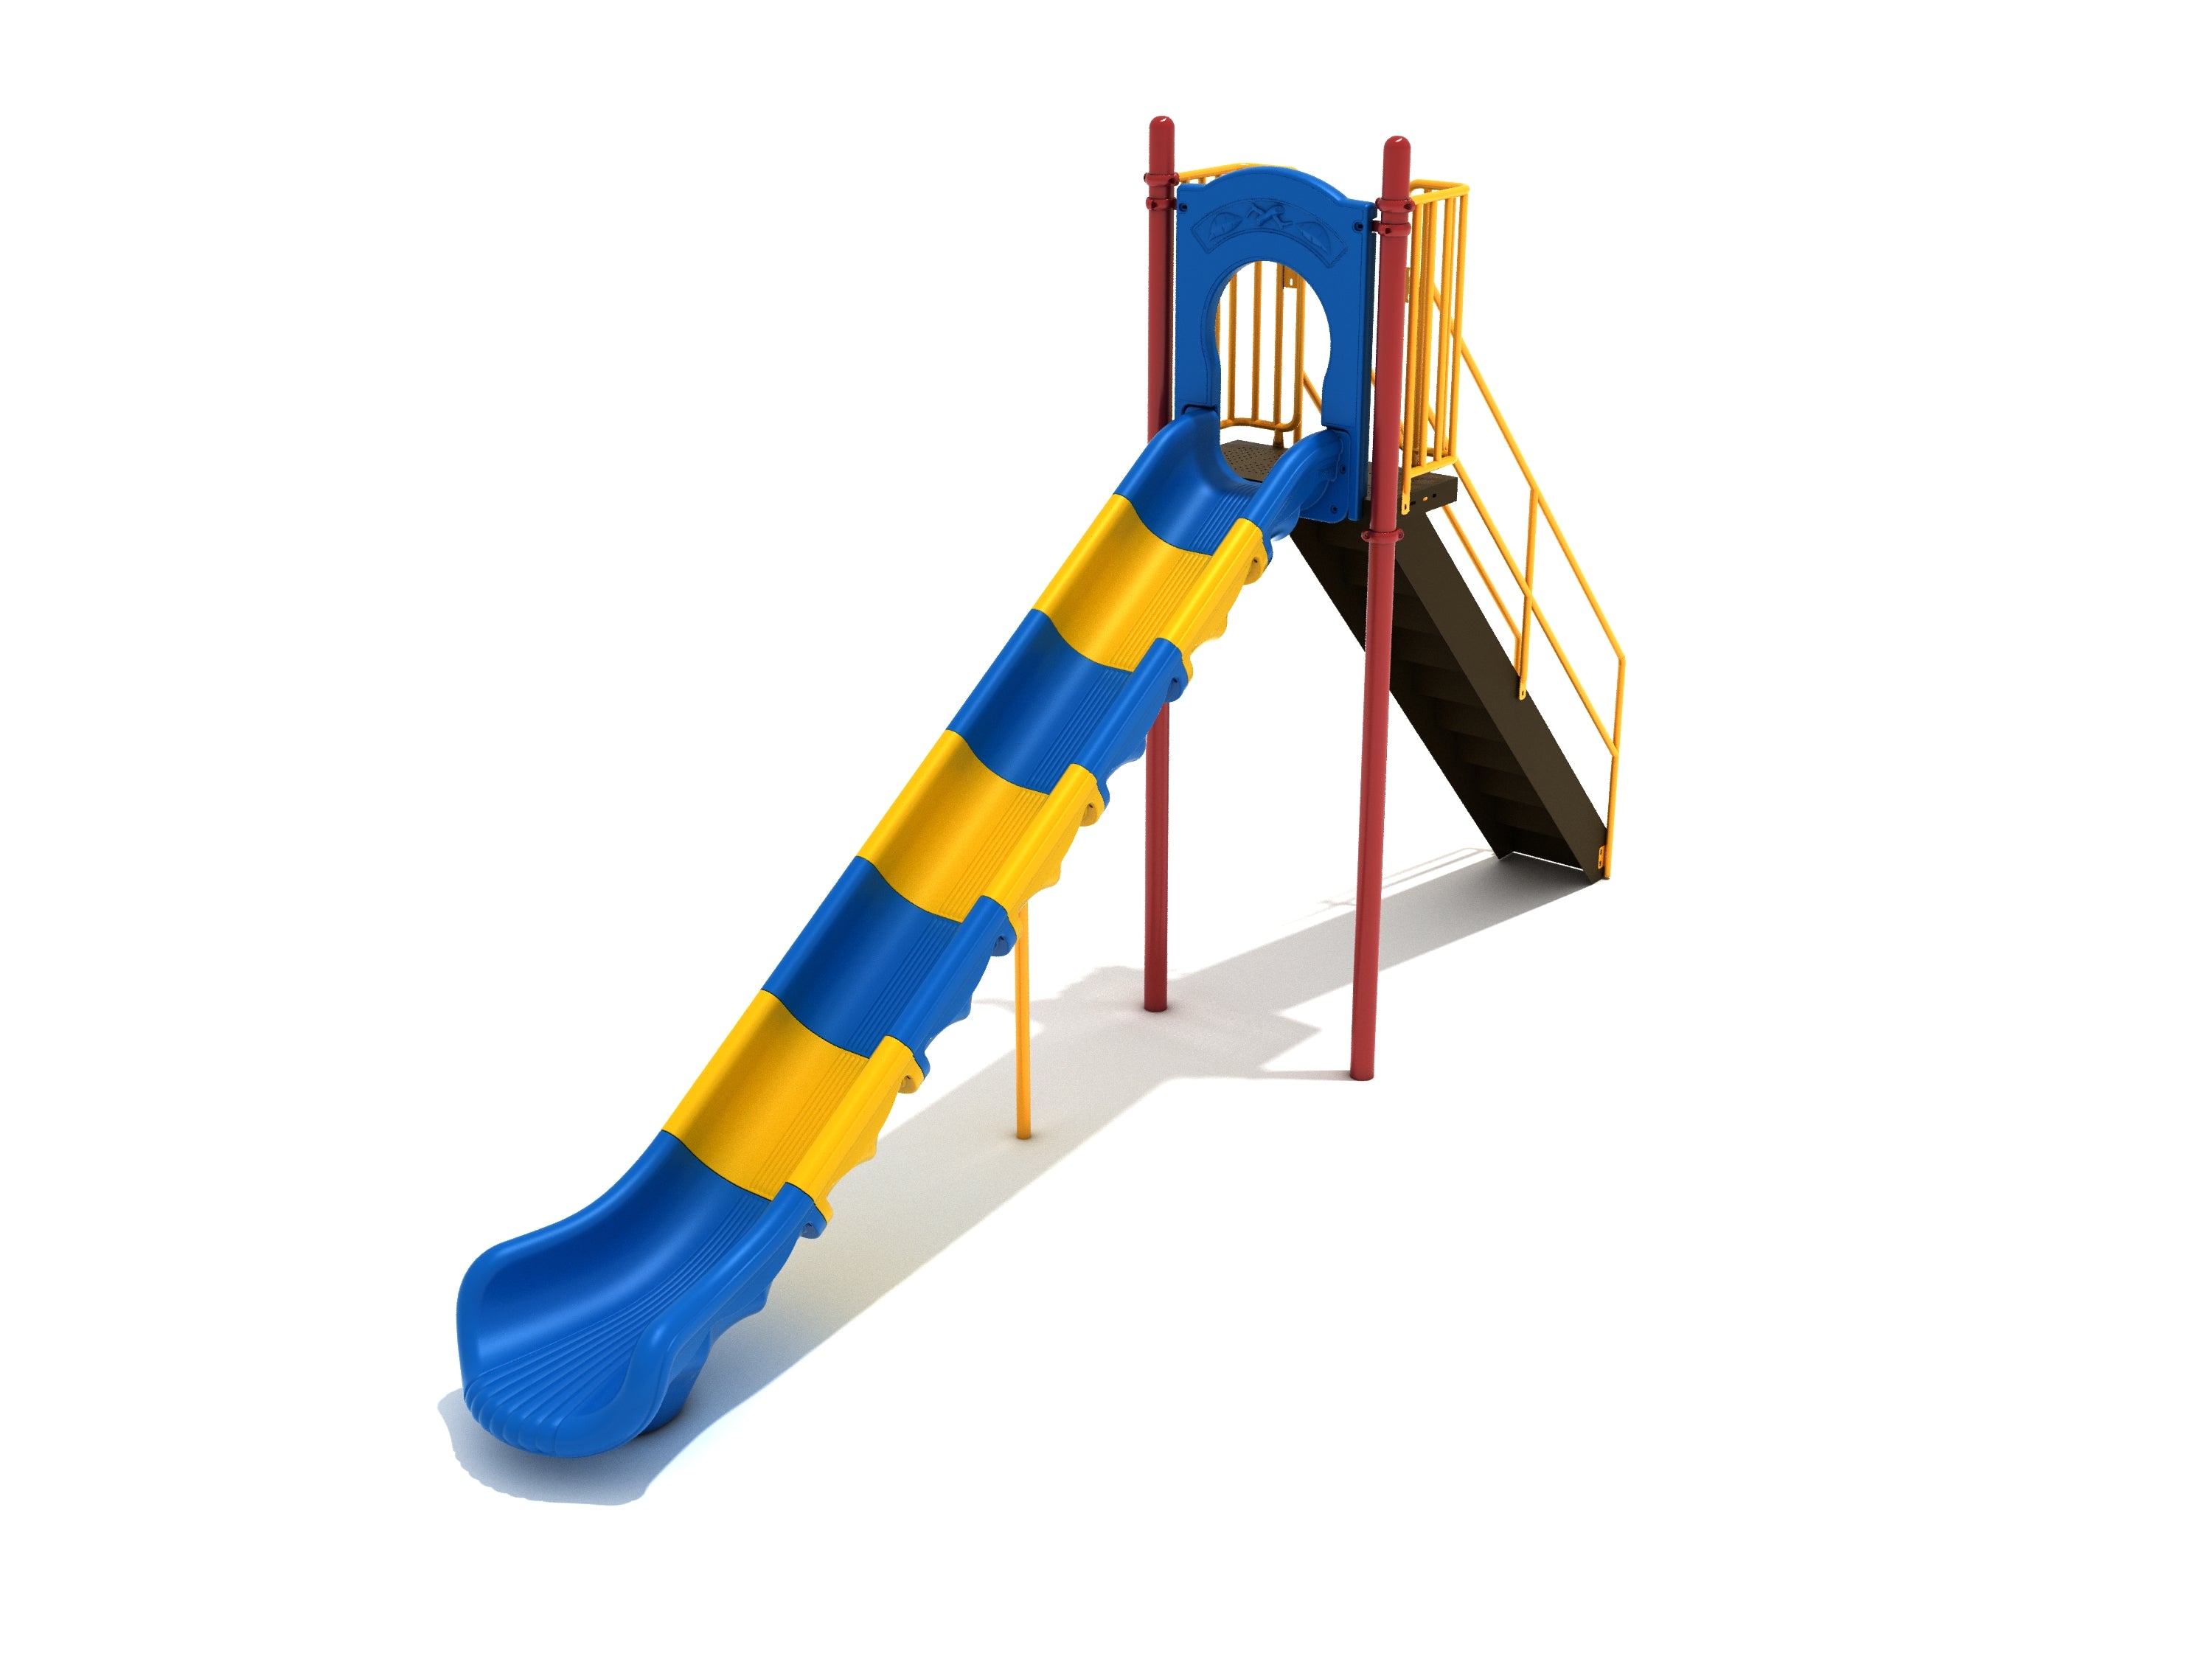 Sectional Straight Slide 7 Foot Deck Primary Colors